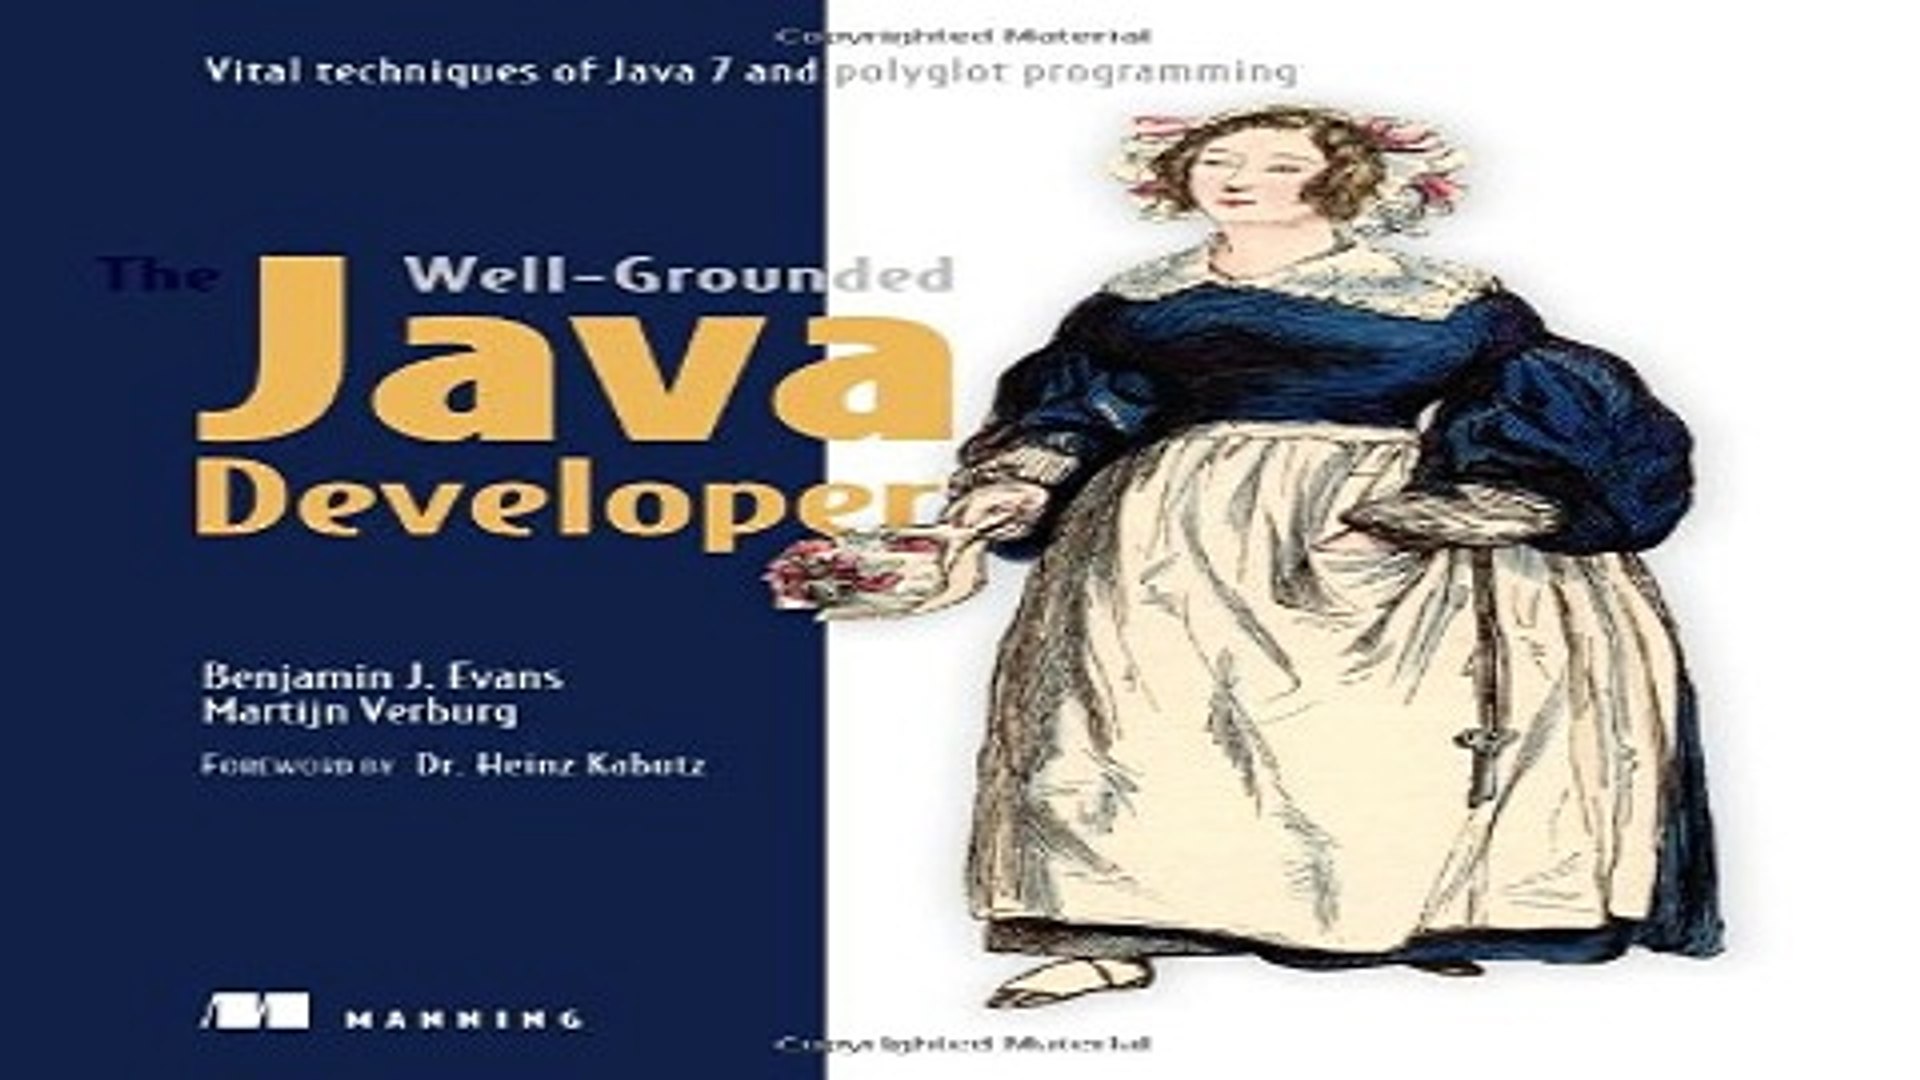 Read The Well Grounded Java Developer  Vital techniques of Java 7 and polyglot programming Ebook